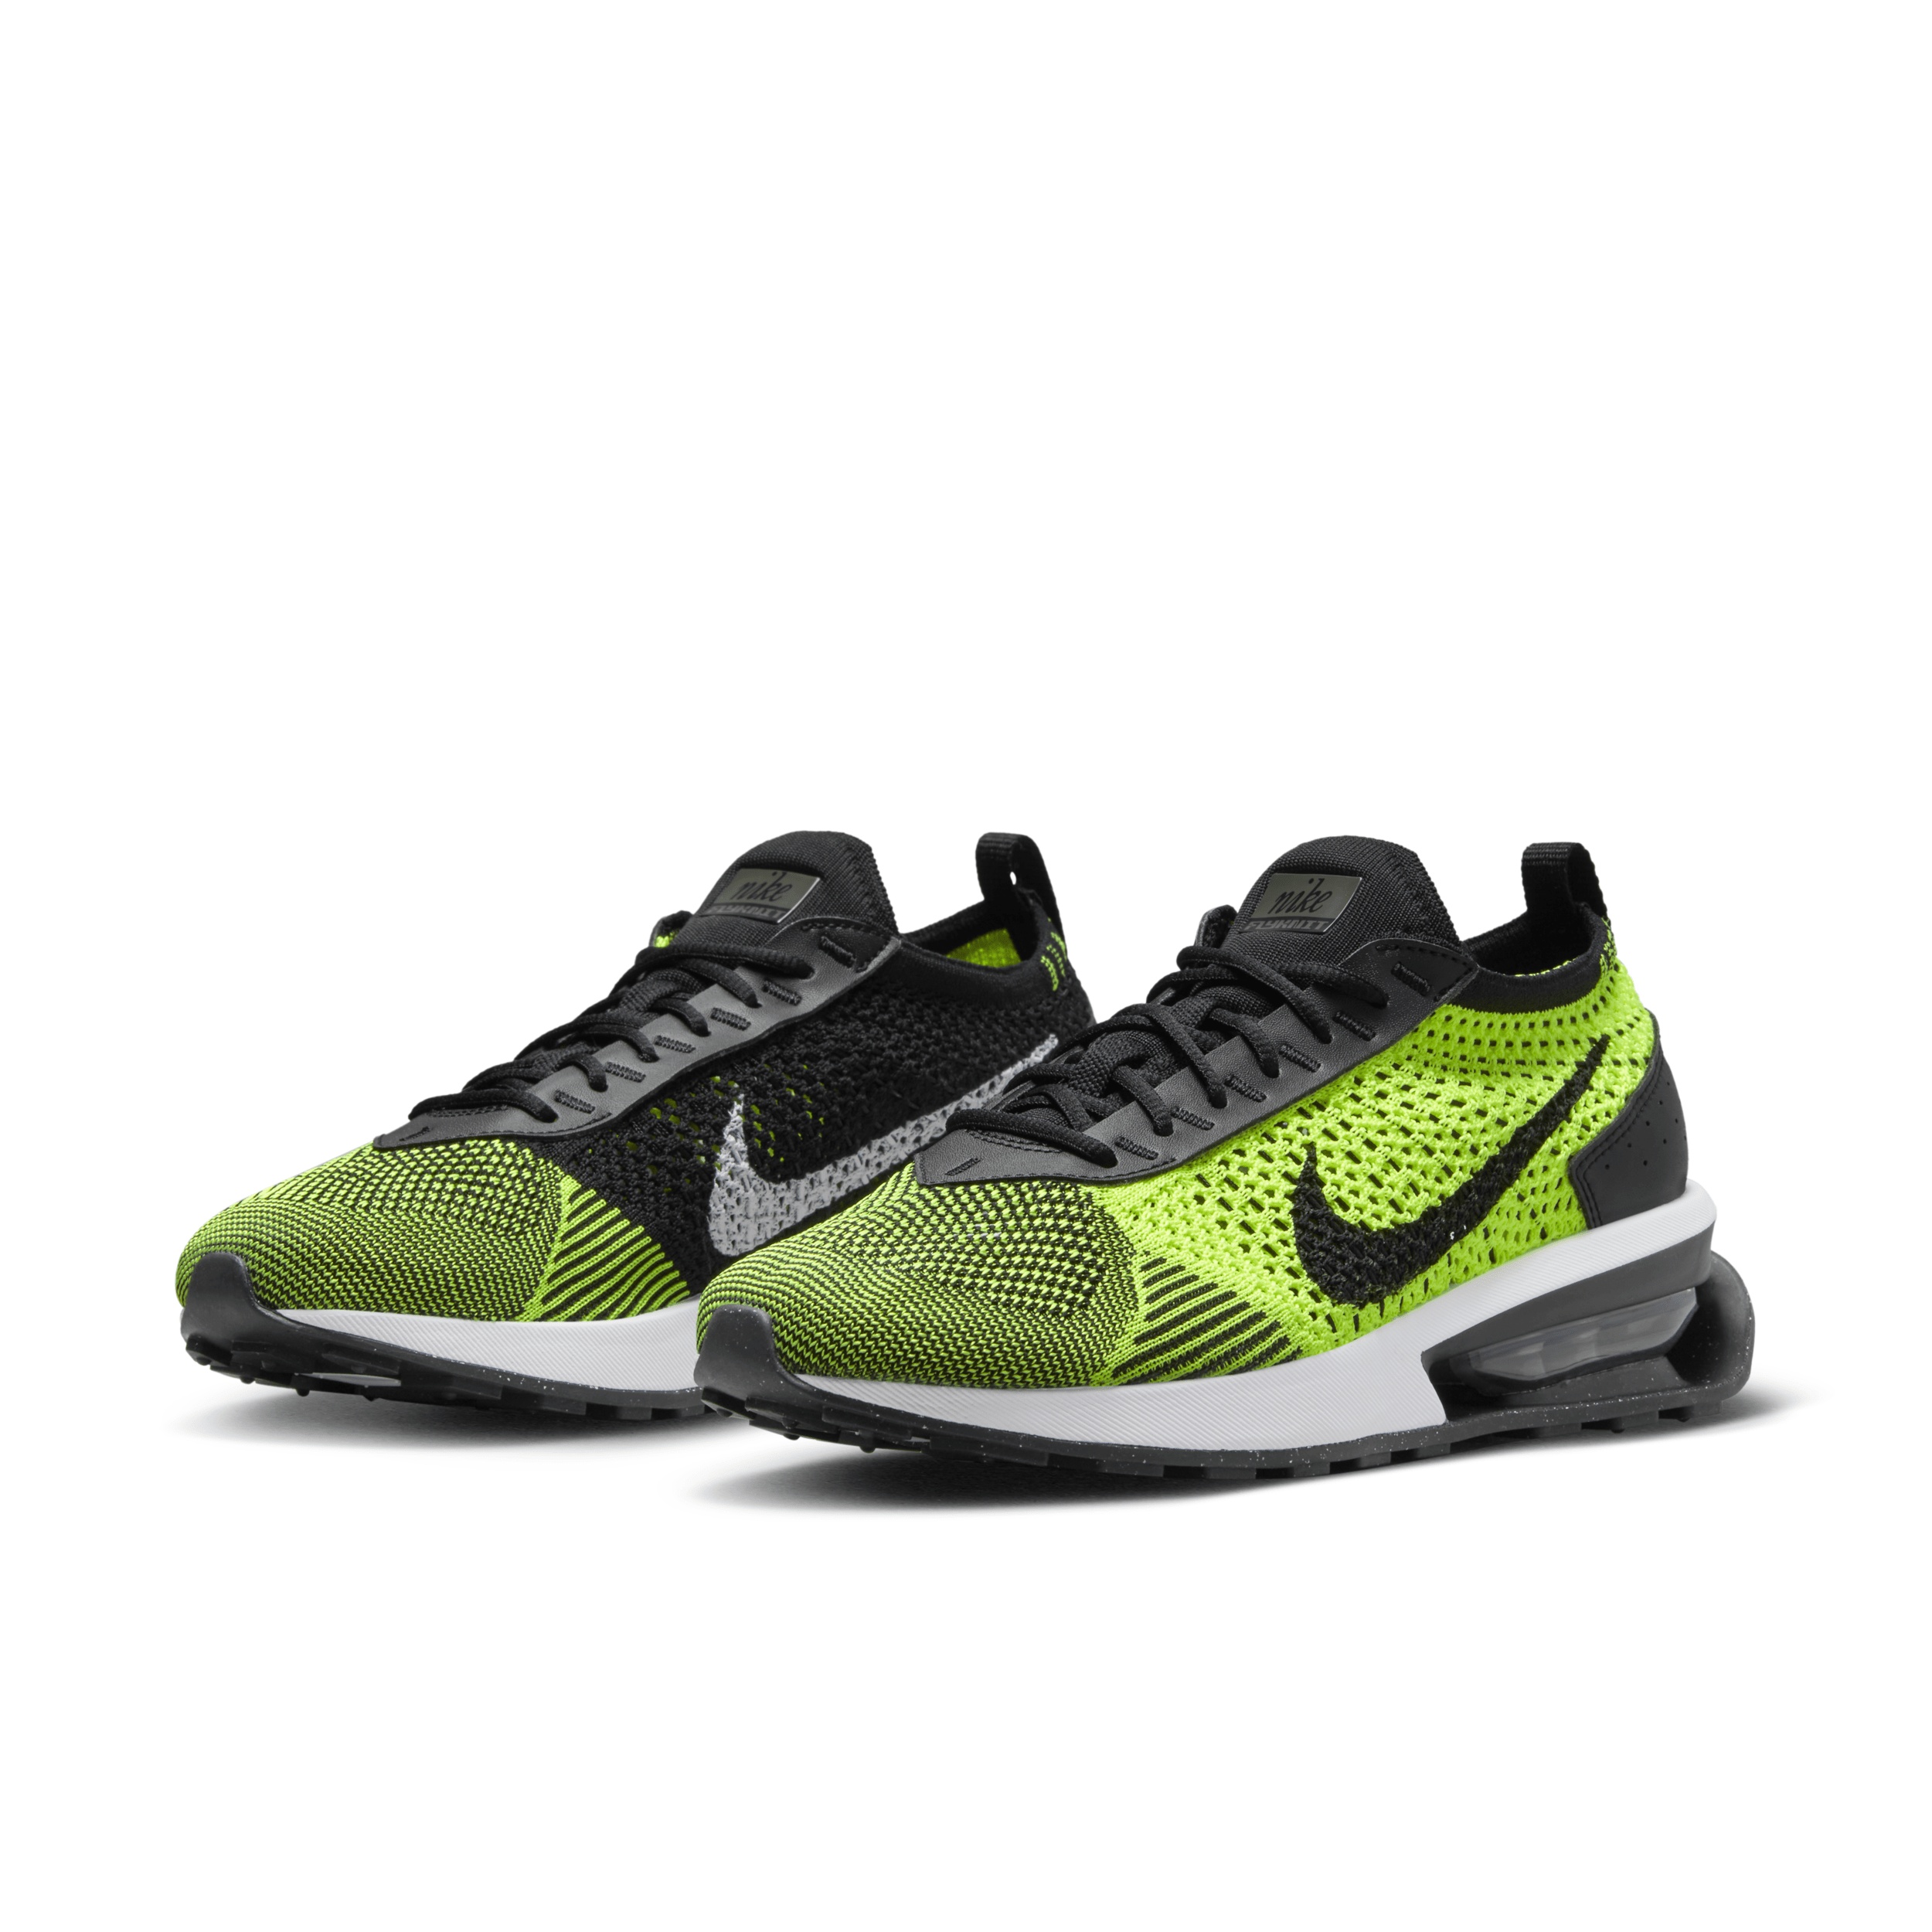 Nike Women's Air Max Flyknit Racer Shoes - 5